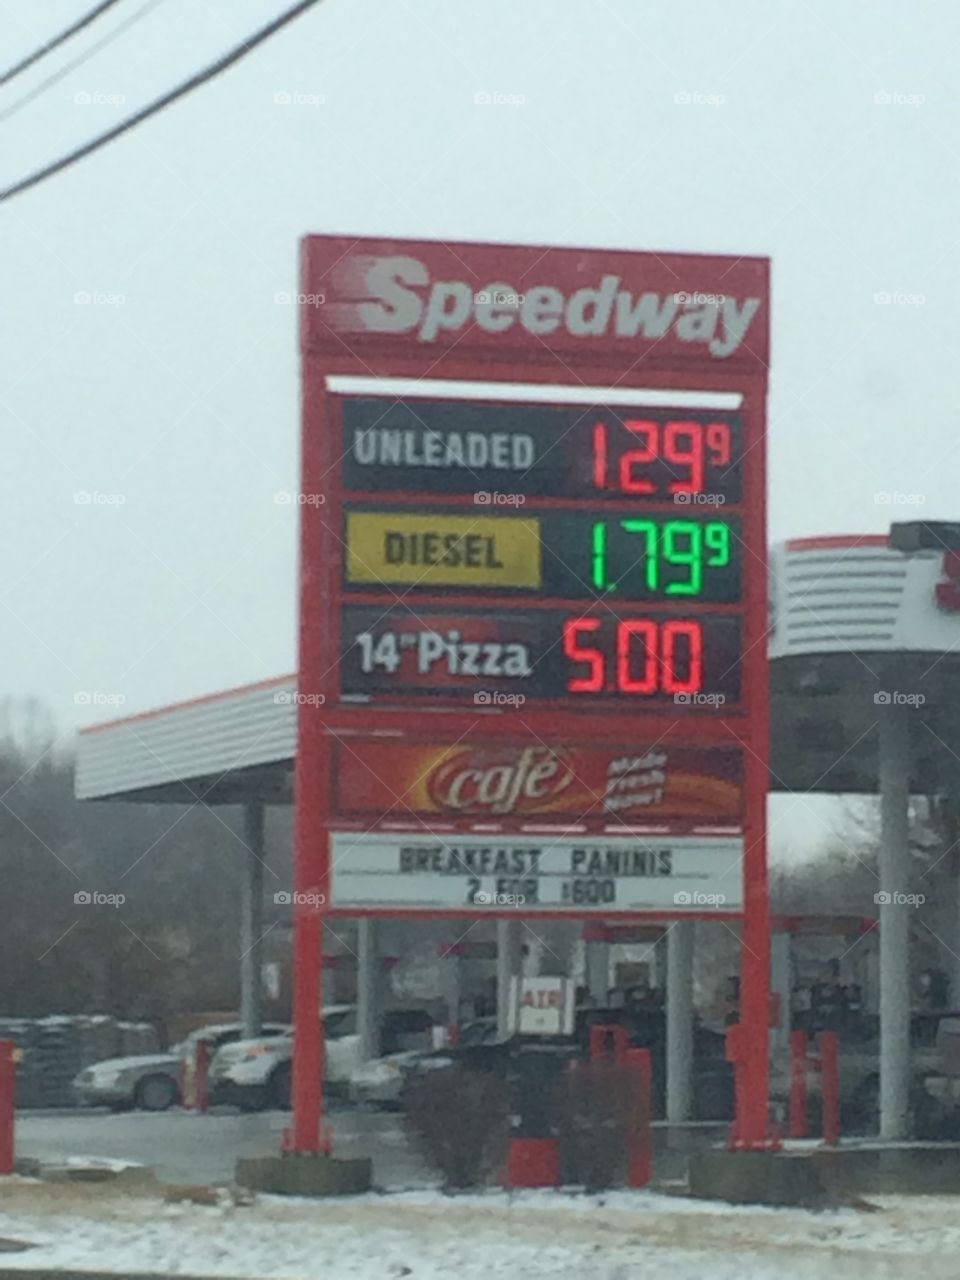 Speedway pizza five dollars unleaded gas $1.29 a gallon speedway Ohio